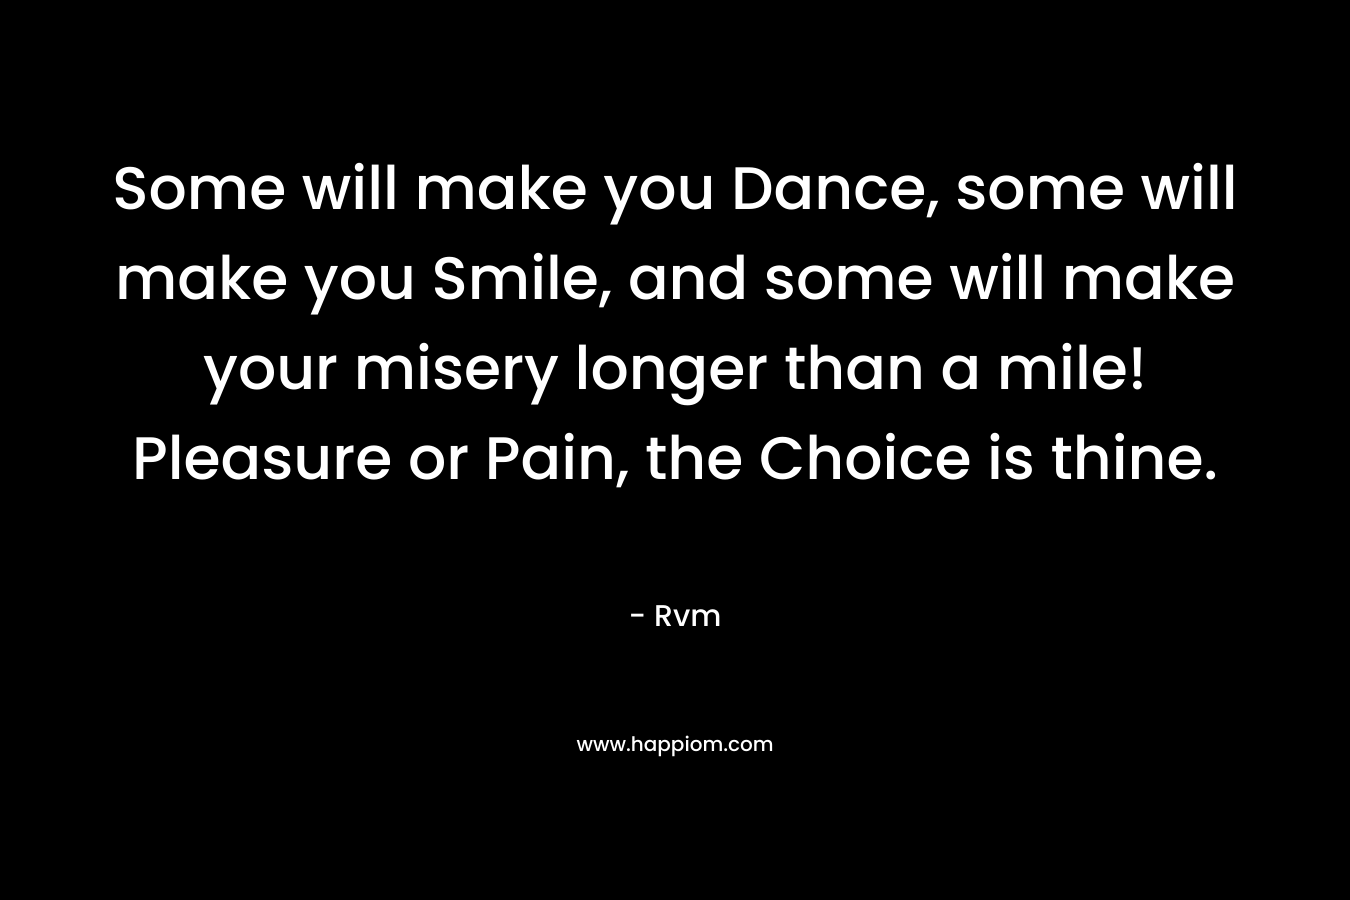 Some will make you Dance, some will make you Smile, and some will make your misery longer than a mile! Pleasure or Pain, the Choice is thine.